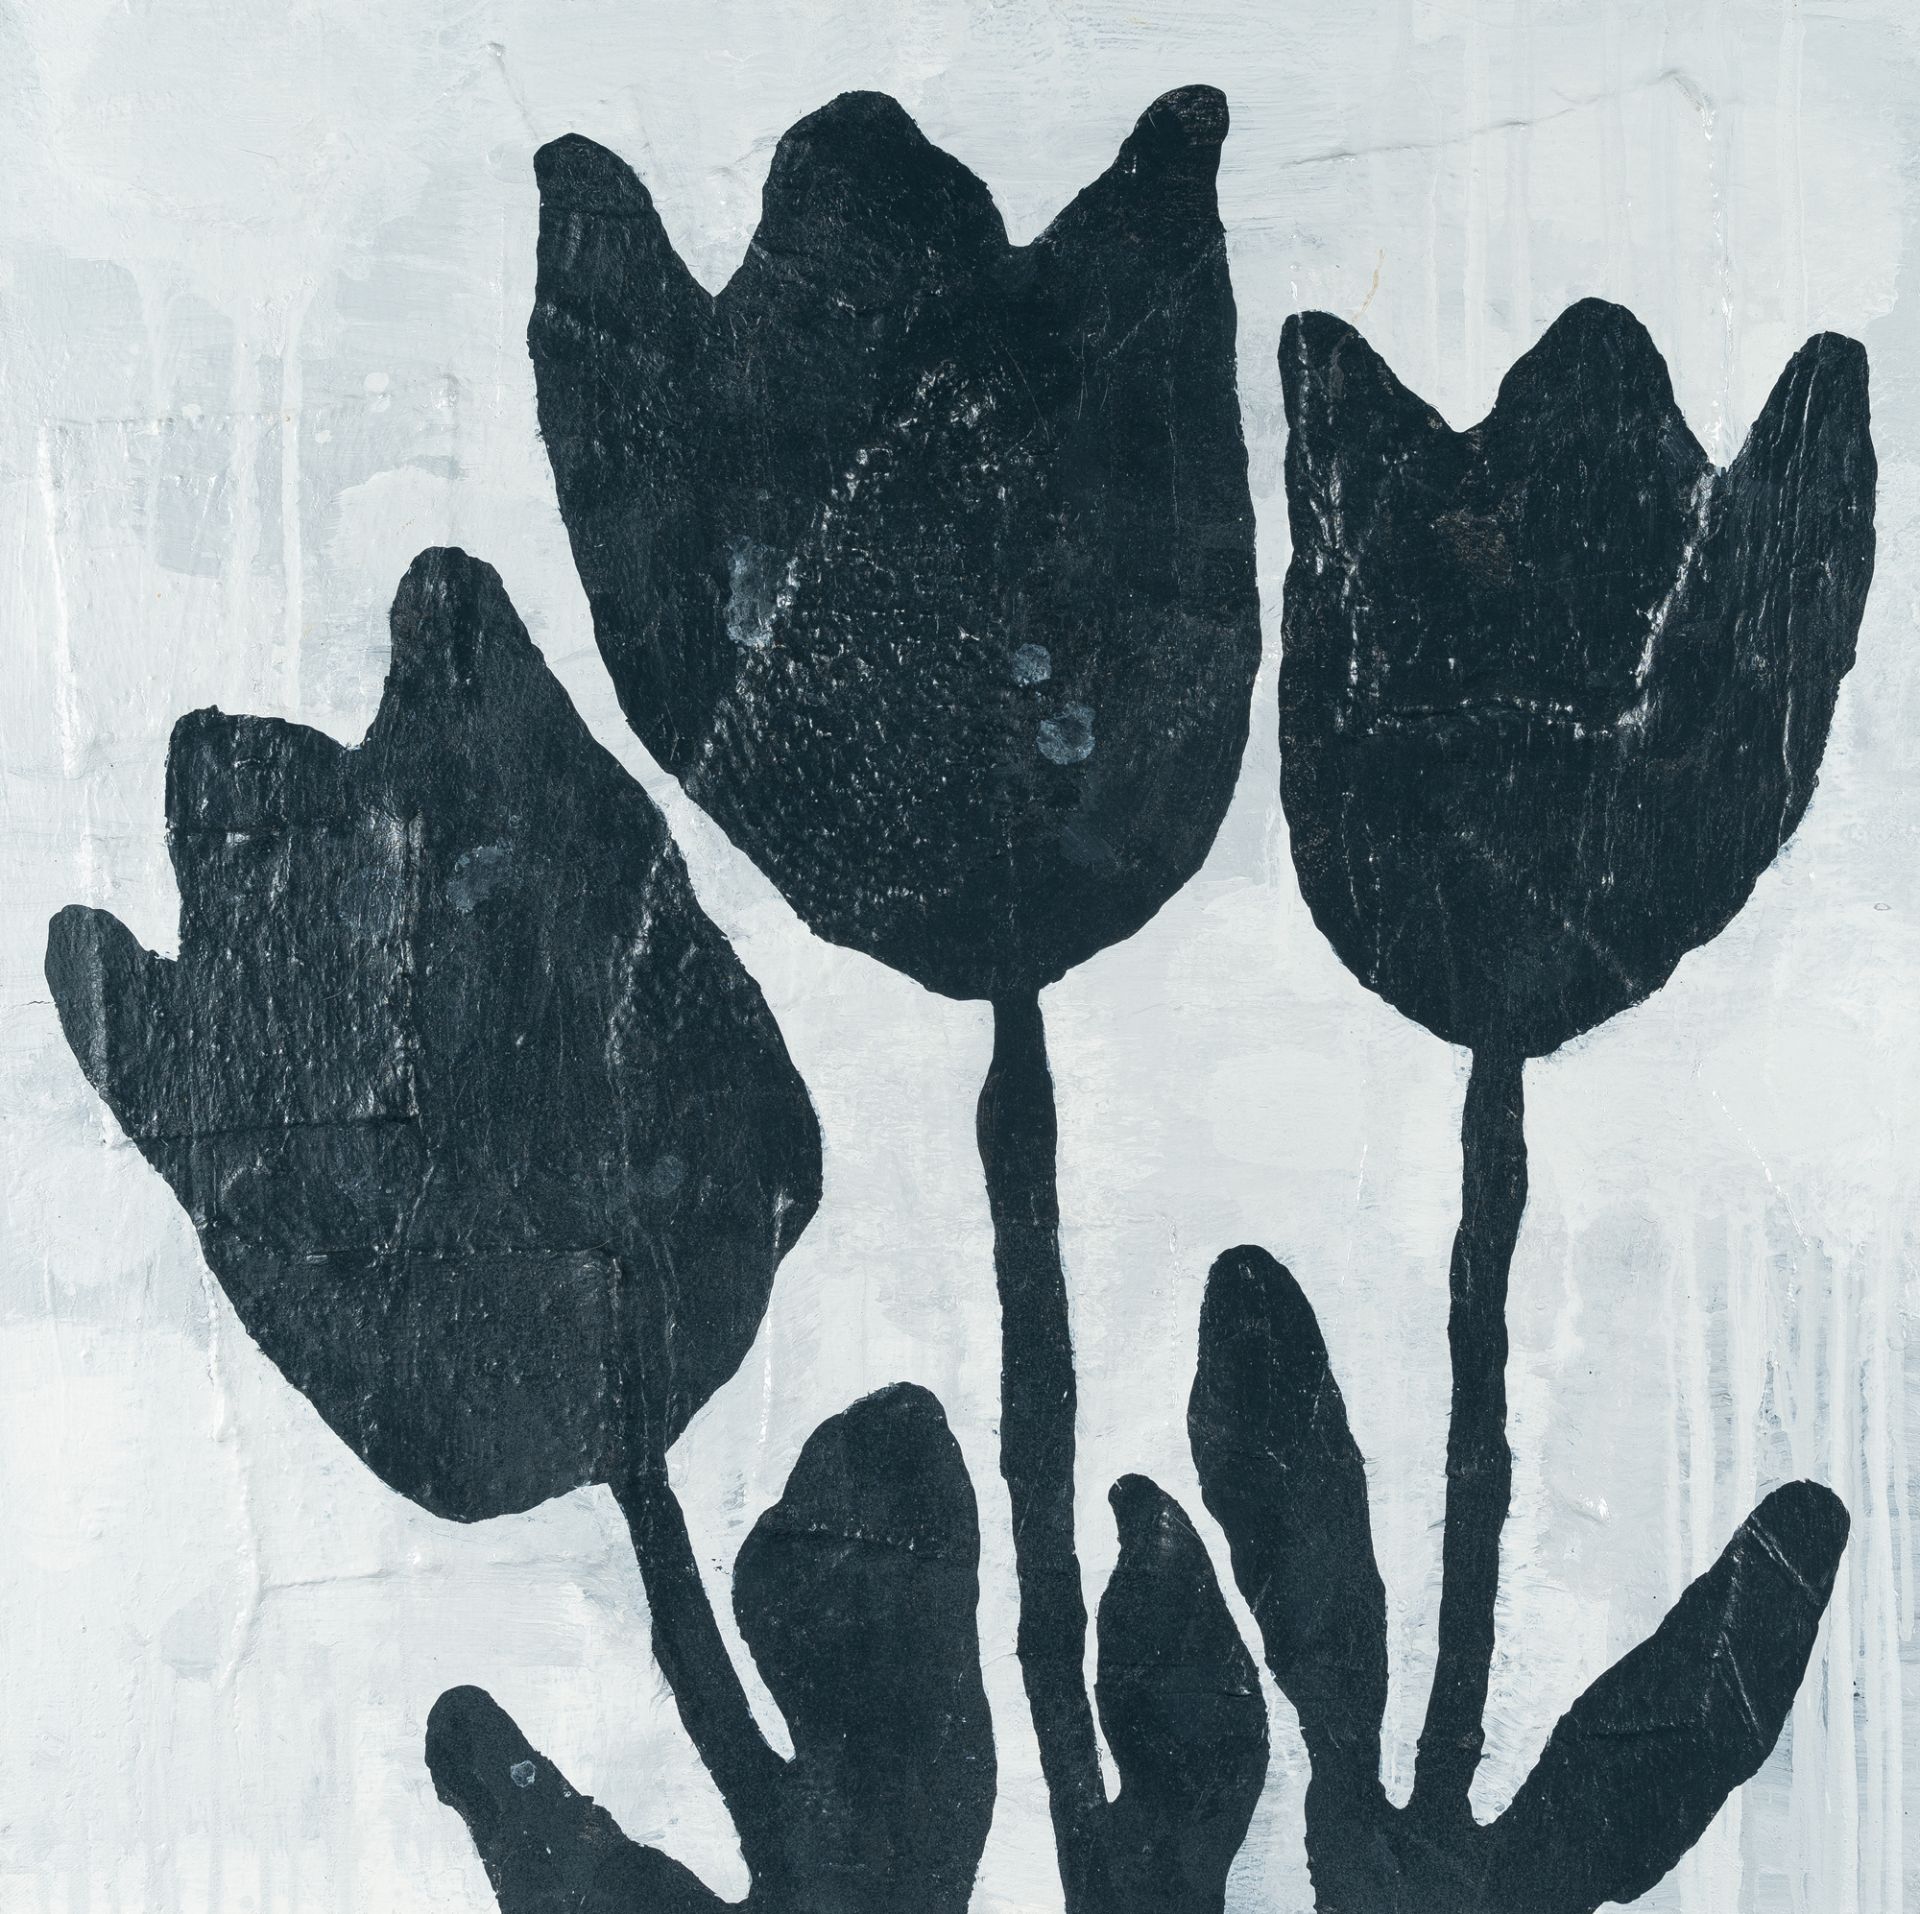 Donald Baechler (1956 Hartford/Connecticut – New York 2022), “Tulips”Acrylic, oil and textile